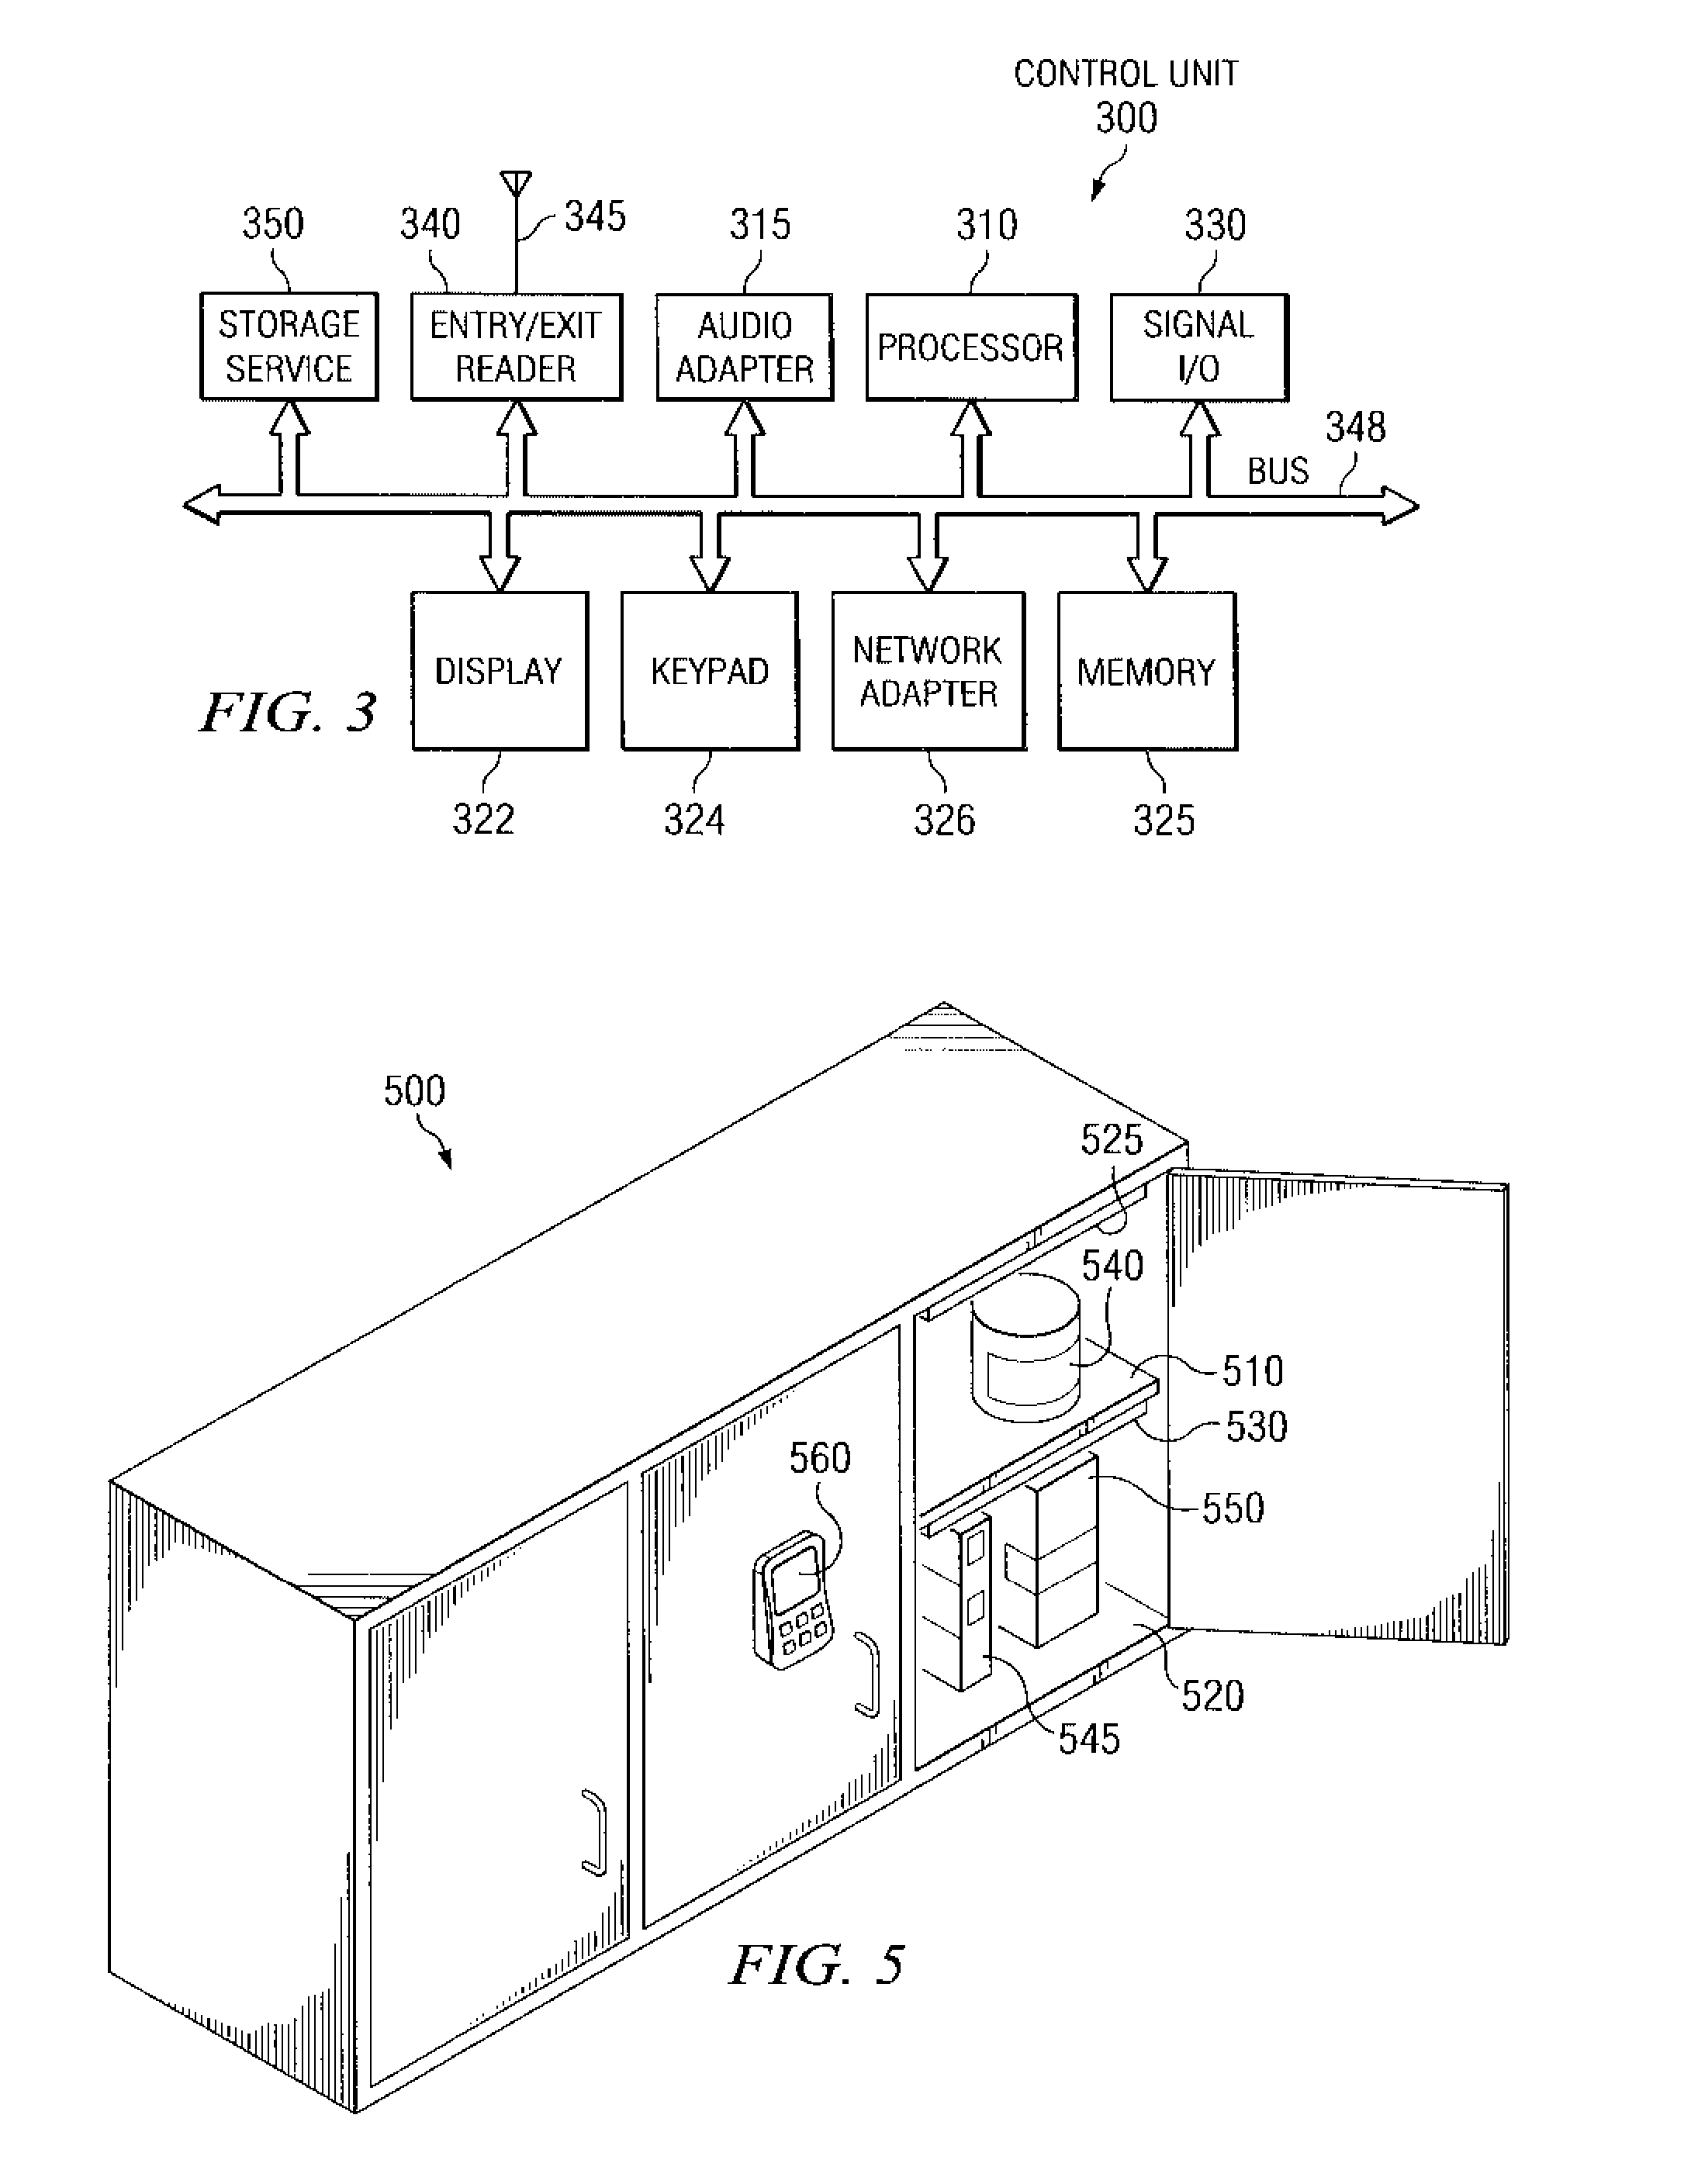 Method and apparatus for temperature based placement of an item within a storage unit